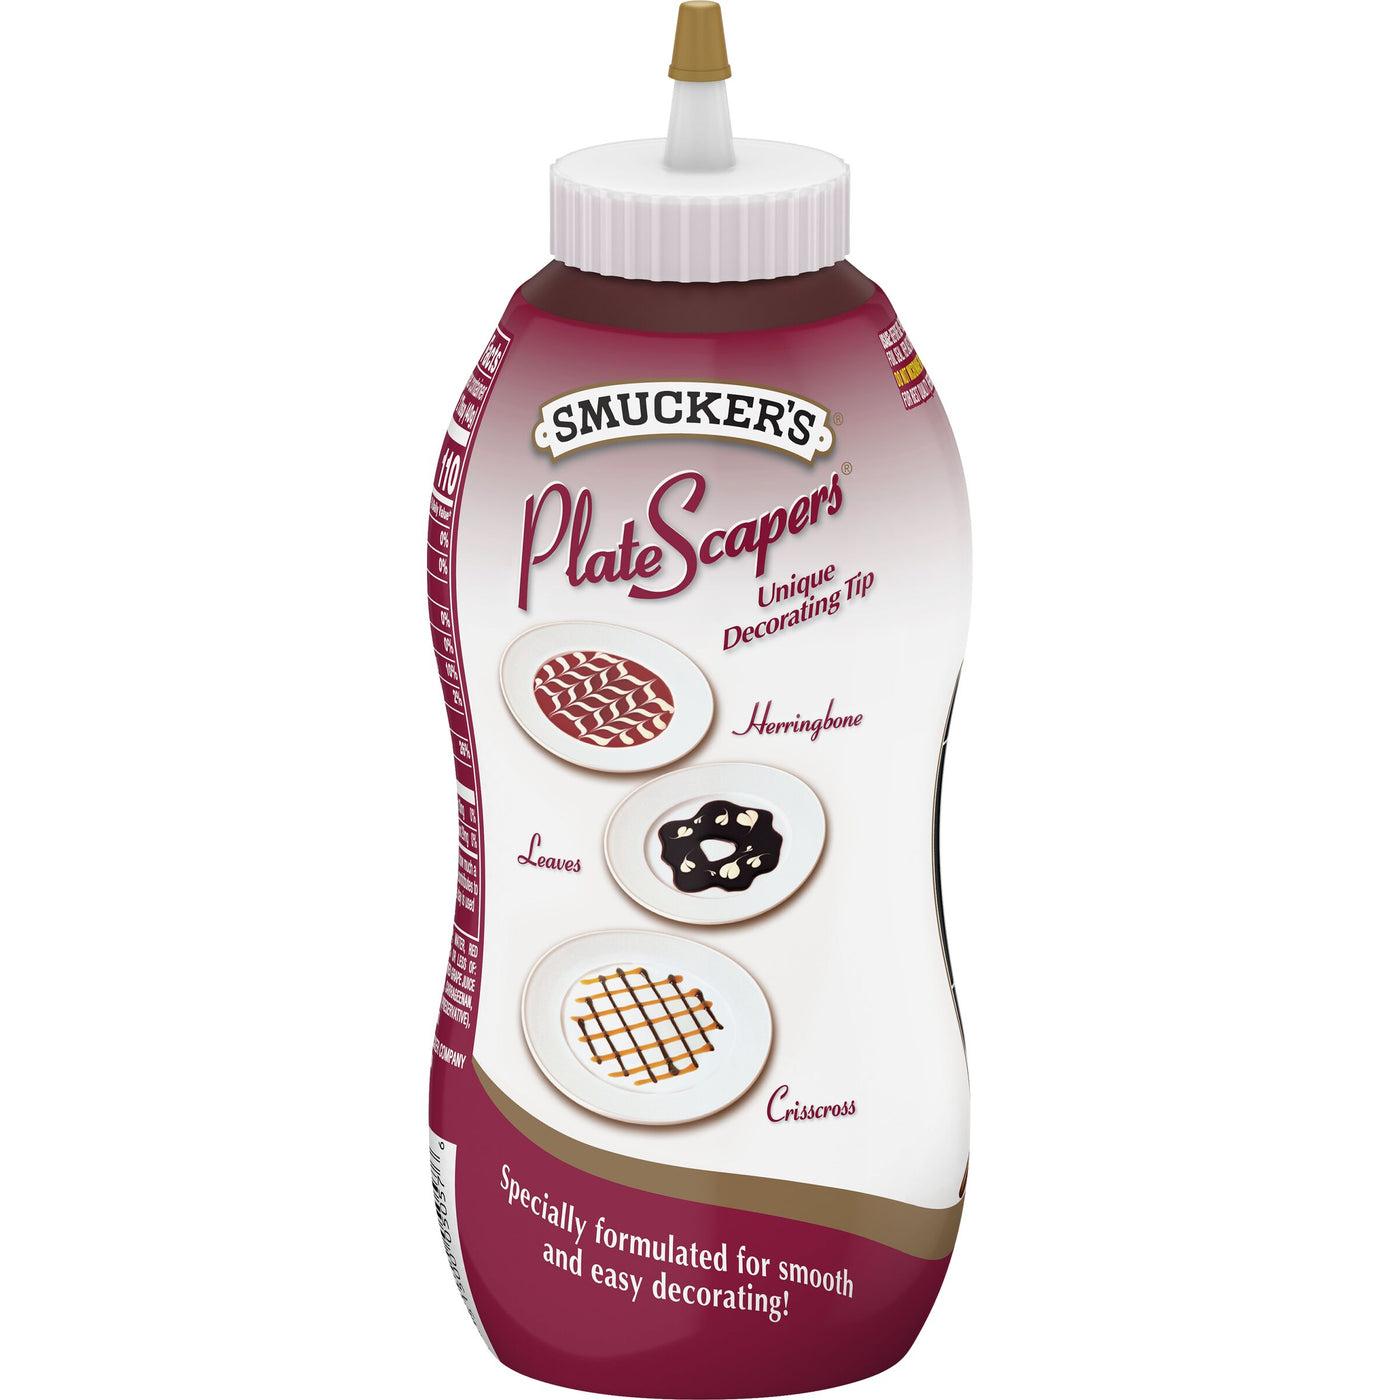 Smucker's Plate Scapers Red Raspberry Flavored Dessert Topping, 19.25 oz